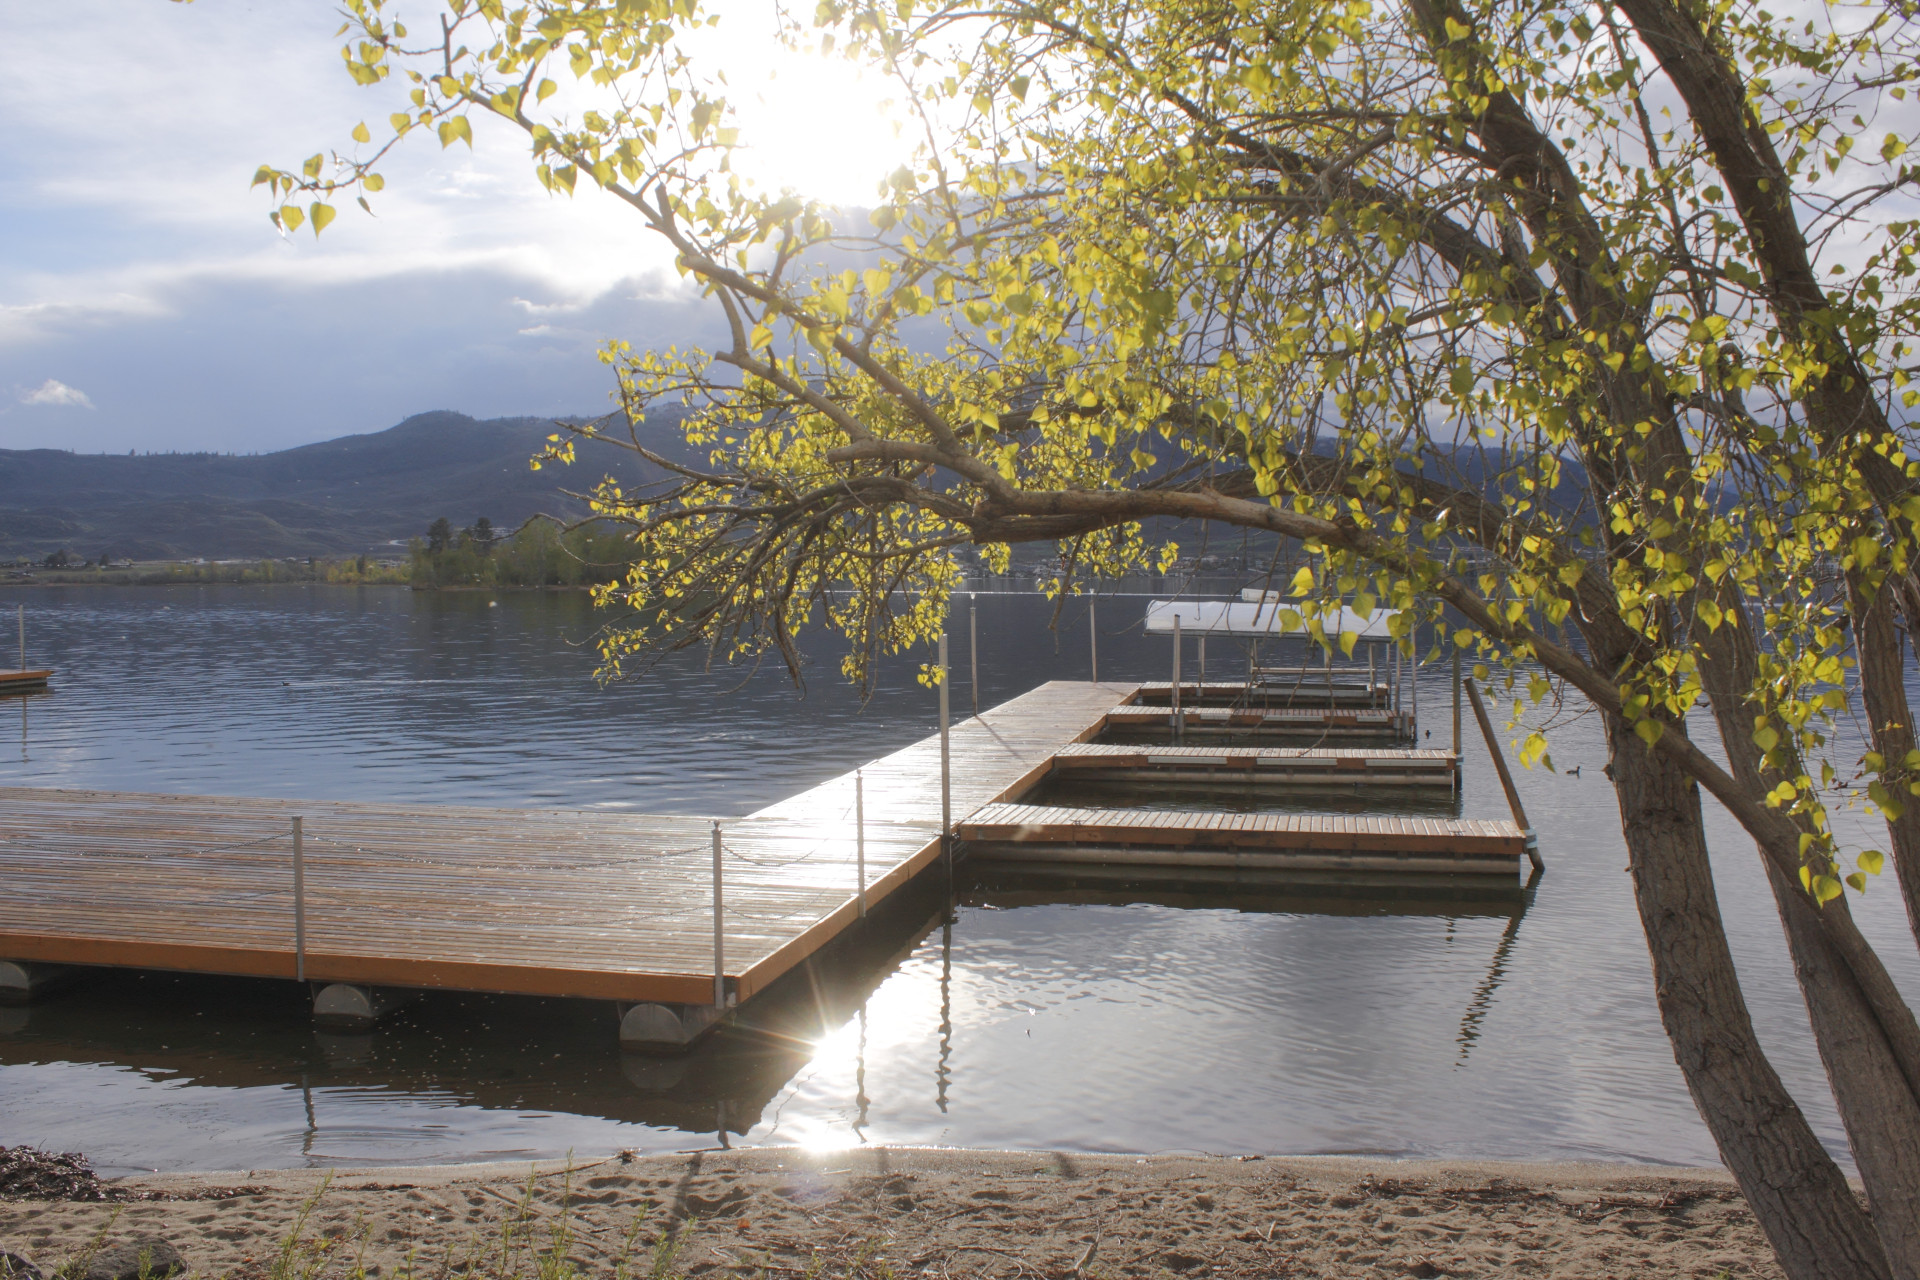 Located in Canada's only desert, Osoyoos Lake is the perfect spot for a mid-drive dip. And if you want to learn more about the desert and the First Nations of the area, check out the Nk'Mip Desert Cultural Centre.<p>You may also like:<a href="https://www.starsinsider.com/n/462401?utm_source=msn.com&utm_medium=display&utm_campaign=referral_description&utm_content=384585v6en-us"> Actors who got seriously buff for movie roles</a></p>